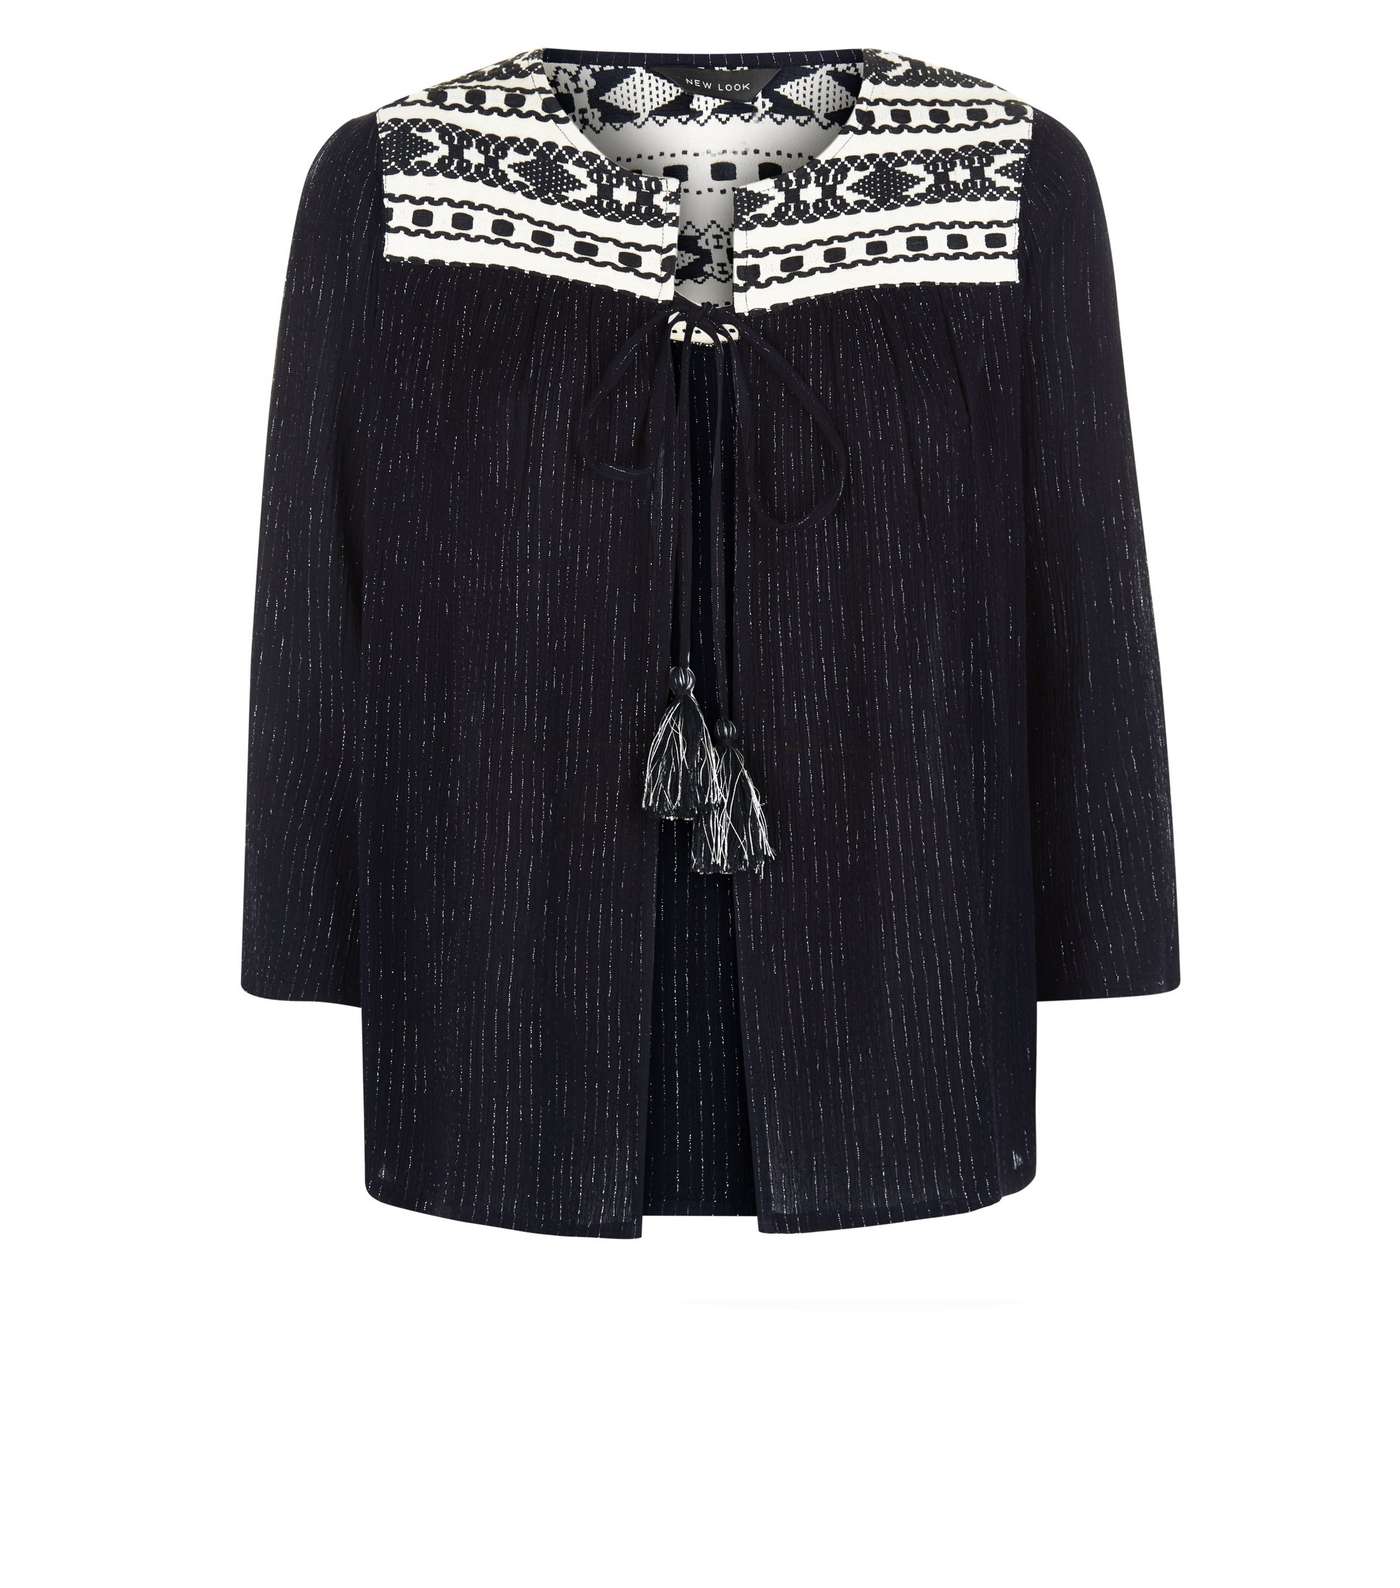 Black Glitter Embroidered Tassel Tie Cover Up Image 4